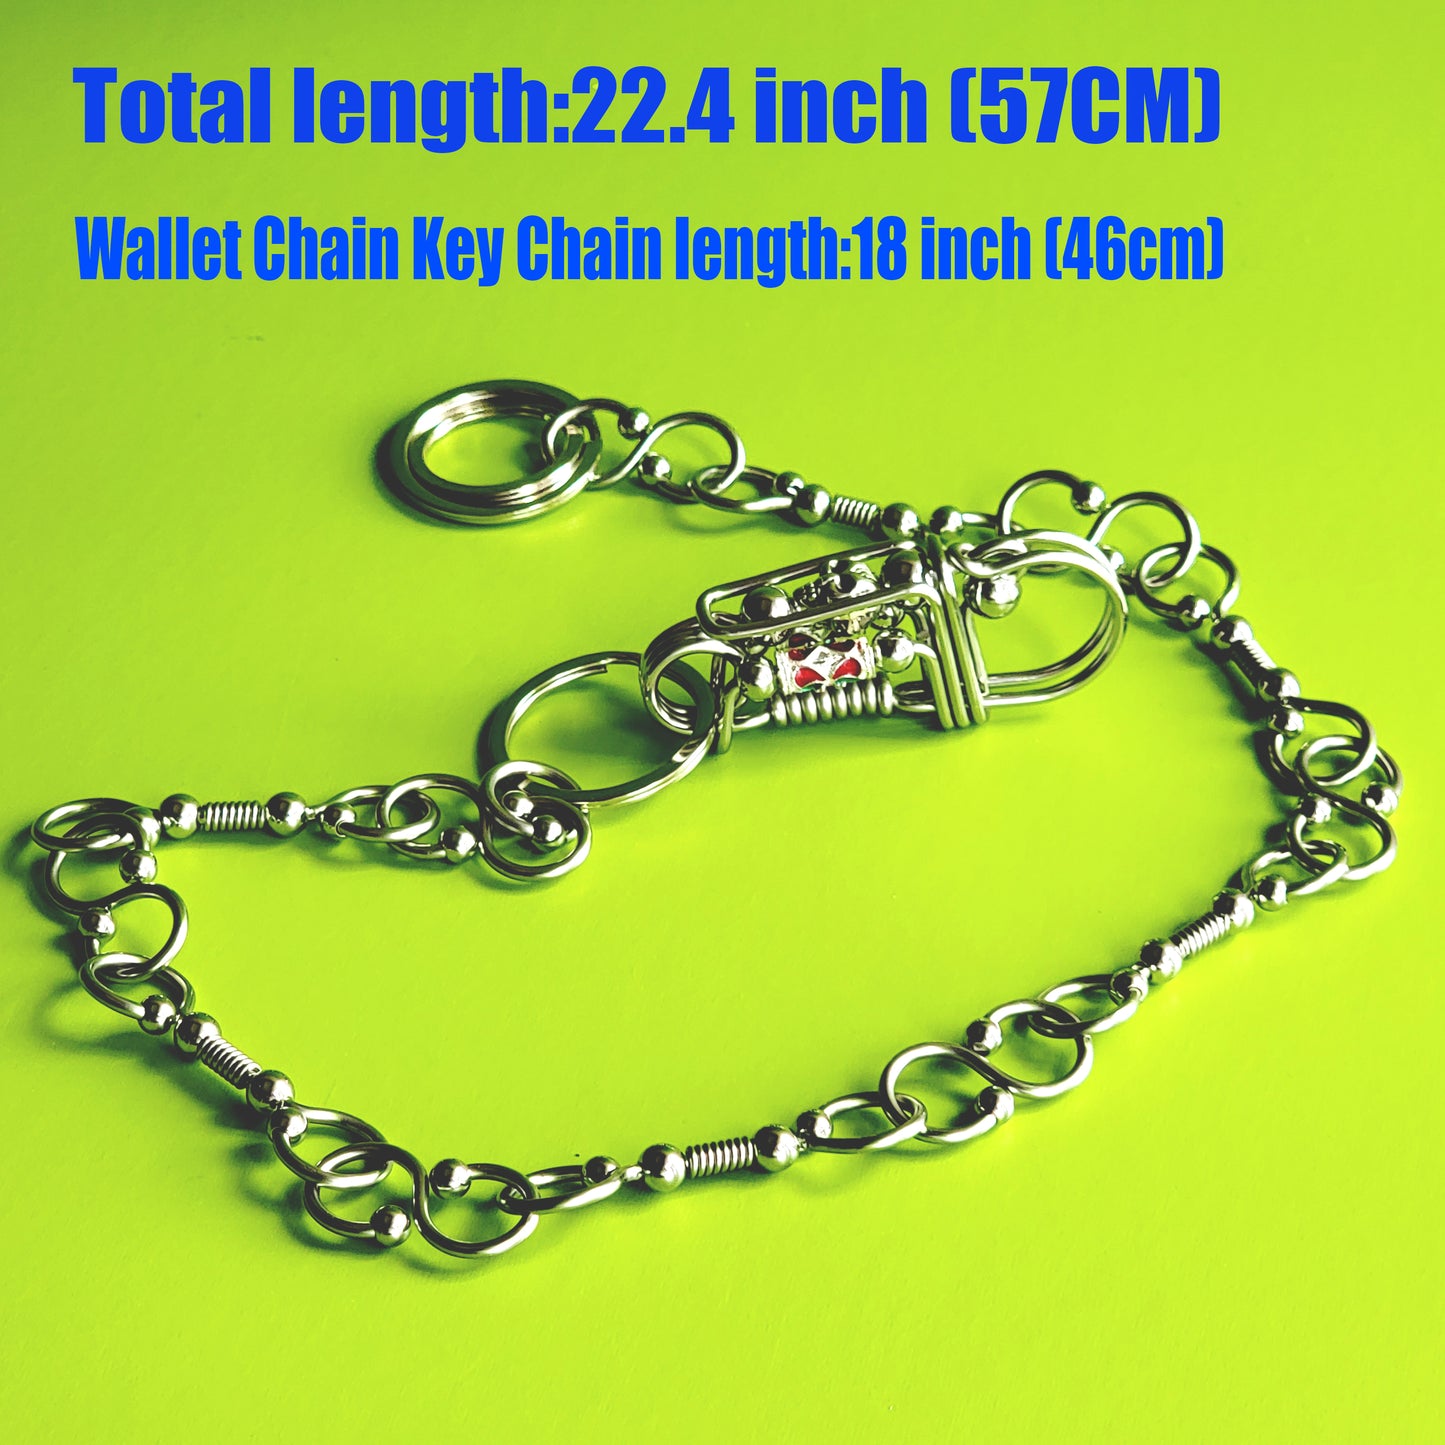 New Men Chunky Metal Thick Wallet Chain Link KeyChain Biker Jeans Women Strong